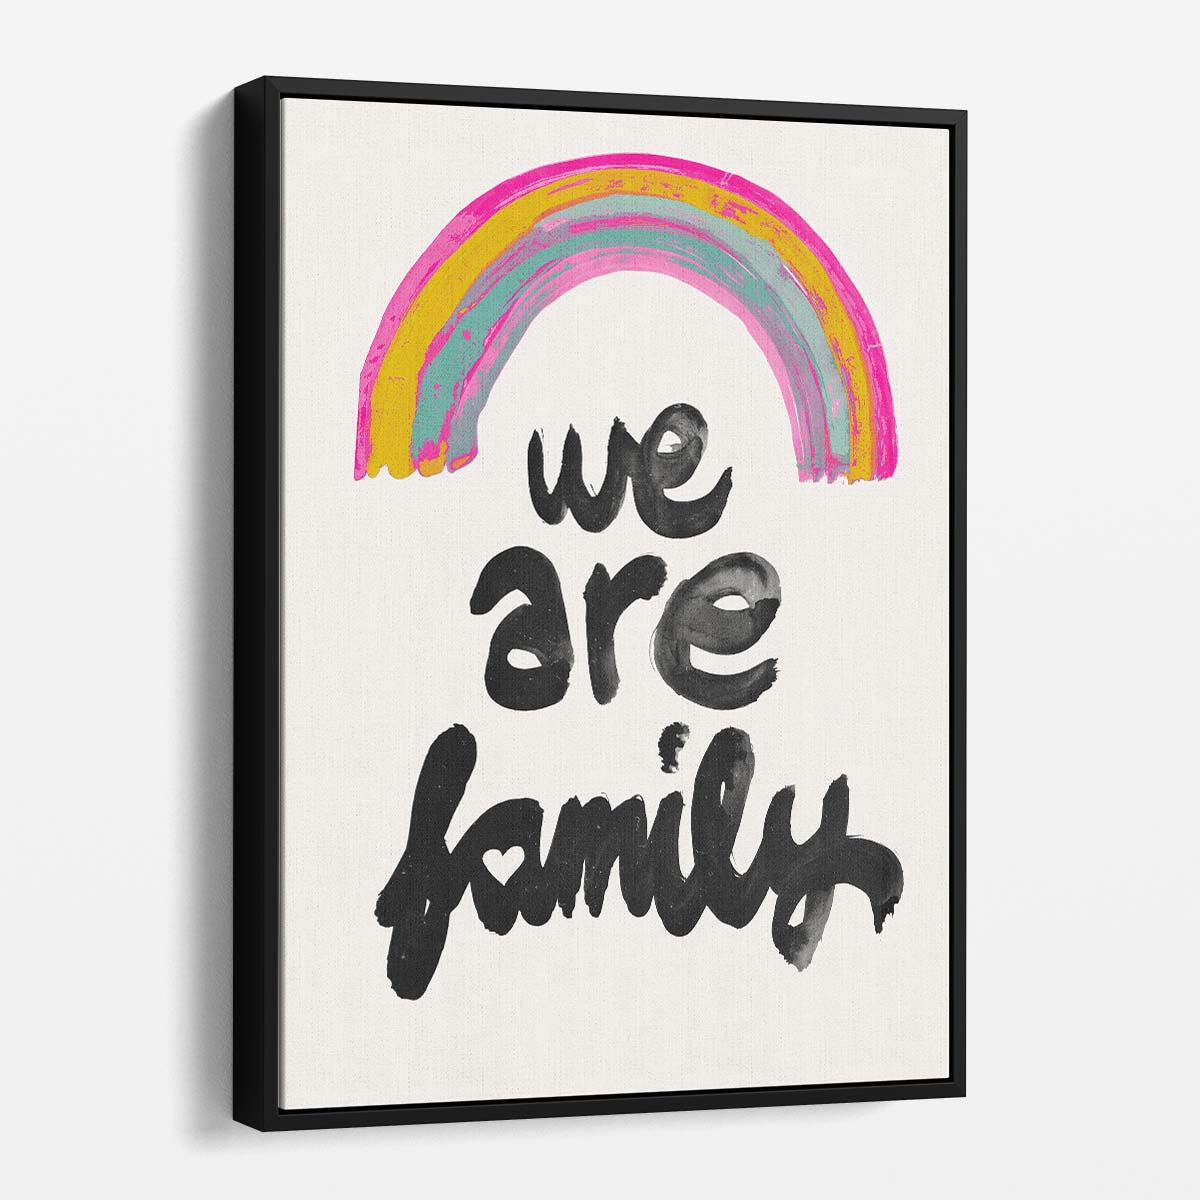 Colorful Family Love Quote Illustration by Treechild on White Background by Luxuriance Designs, made in USA